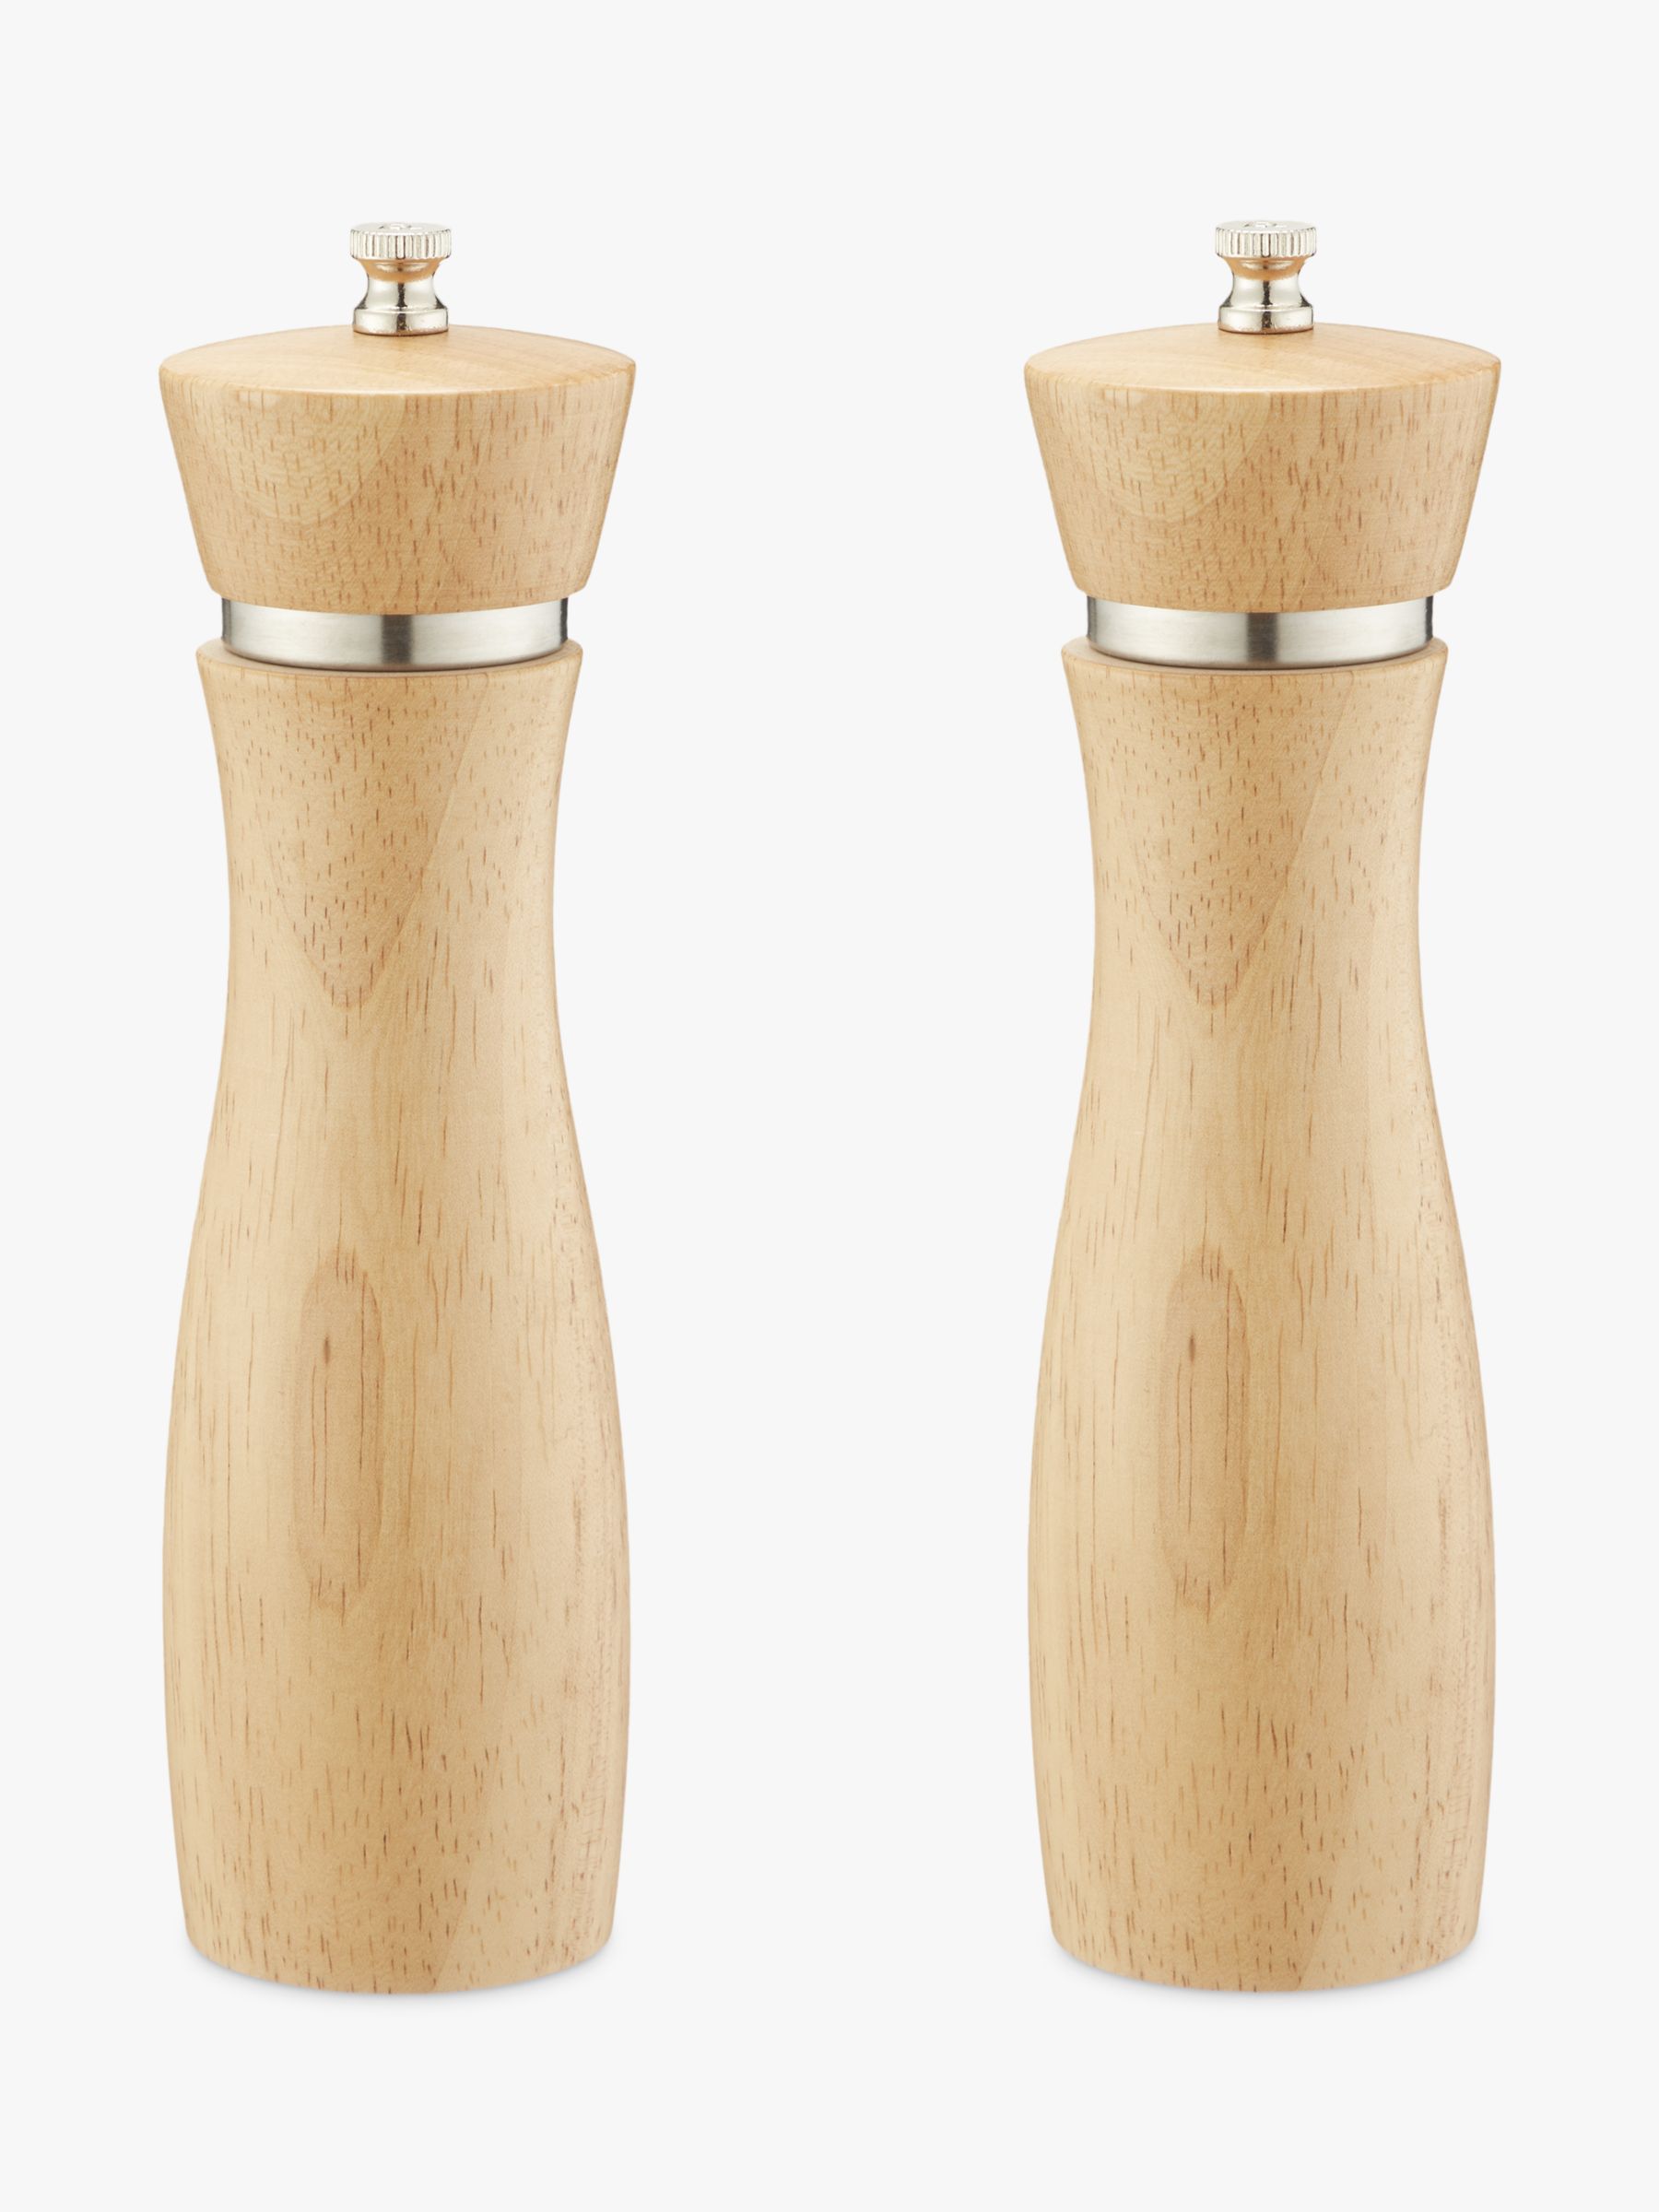 tall wooden salt and pepper grinders